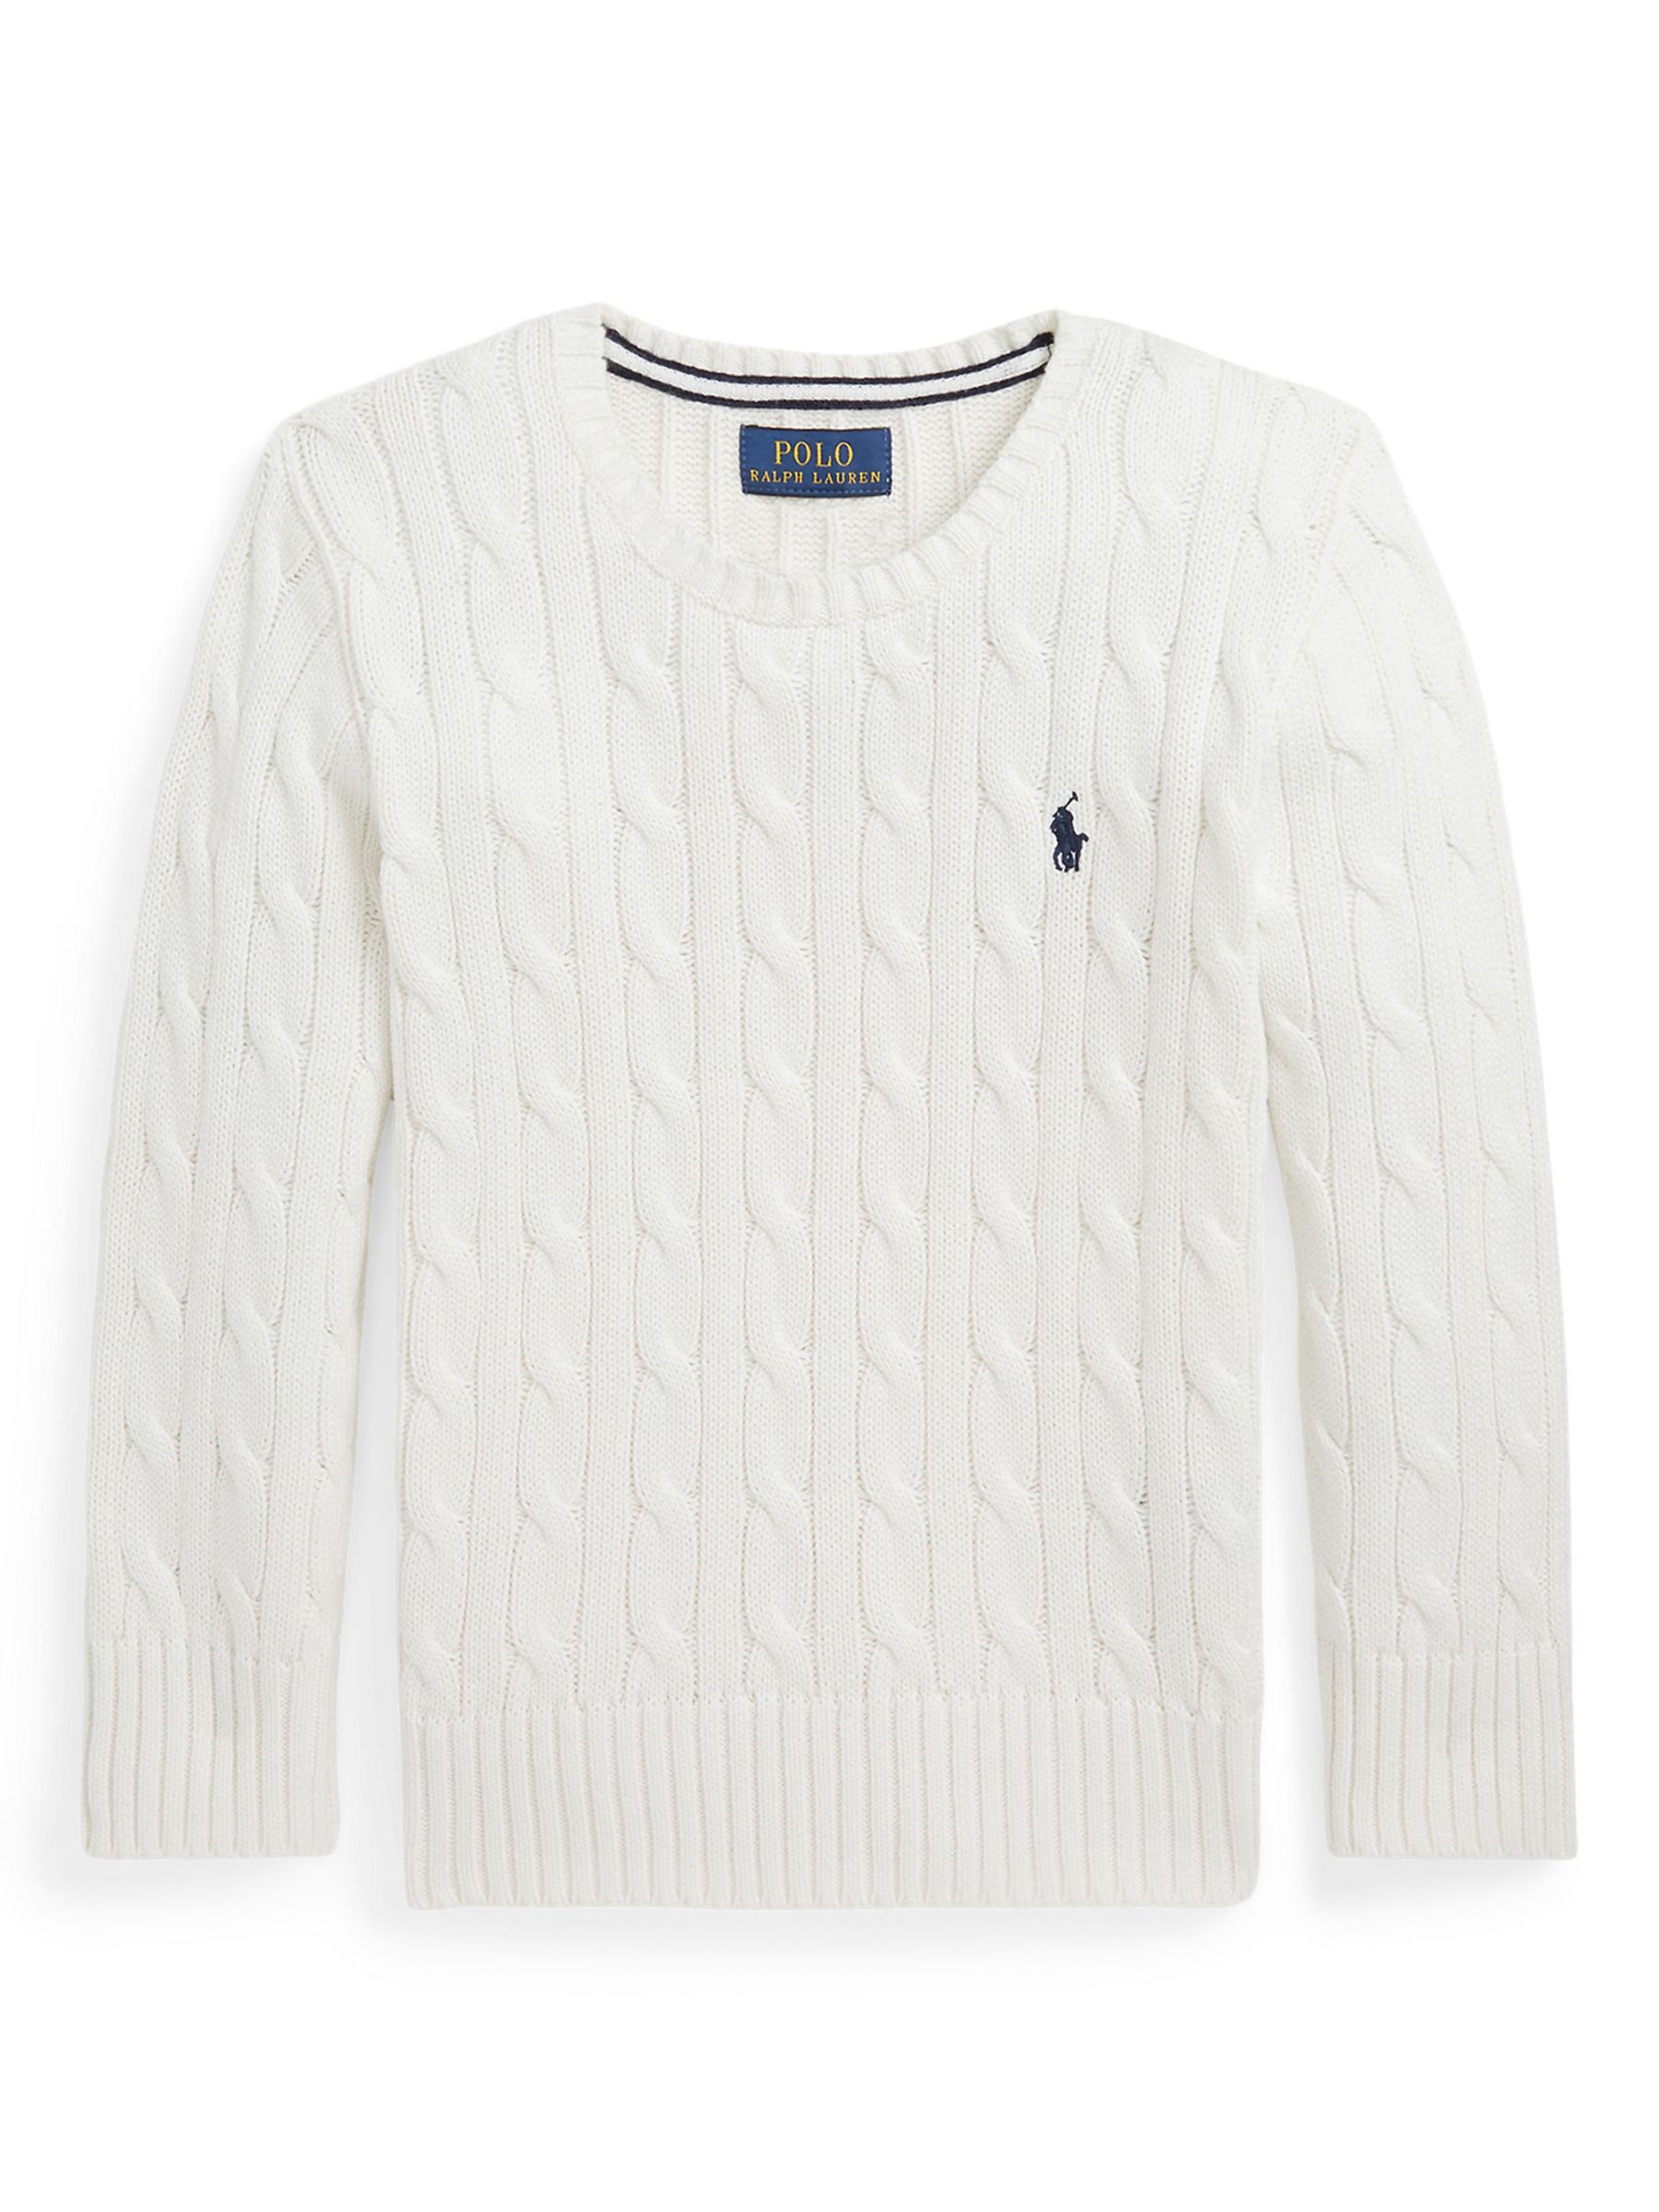 Polo Ralph Lauren Kids' Long Sleeve Cable Jumper, Deckwash White at ...